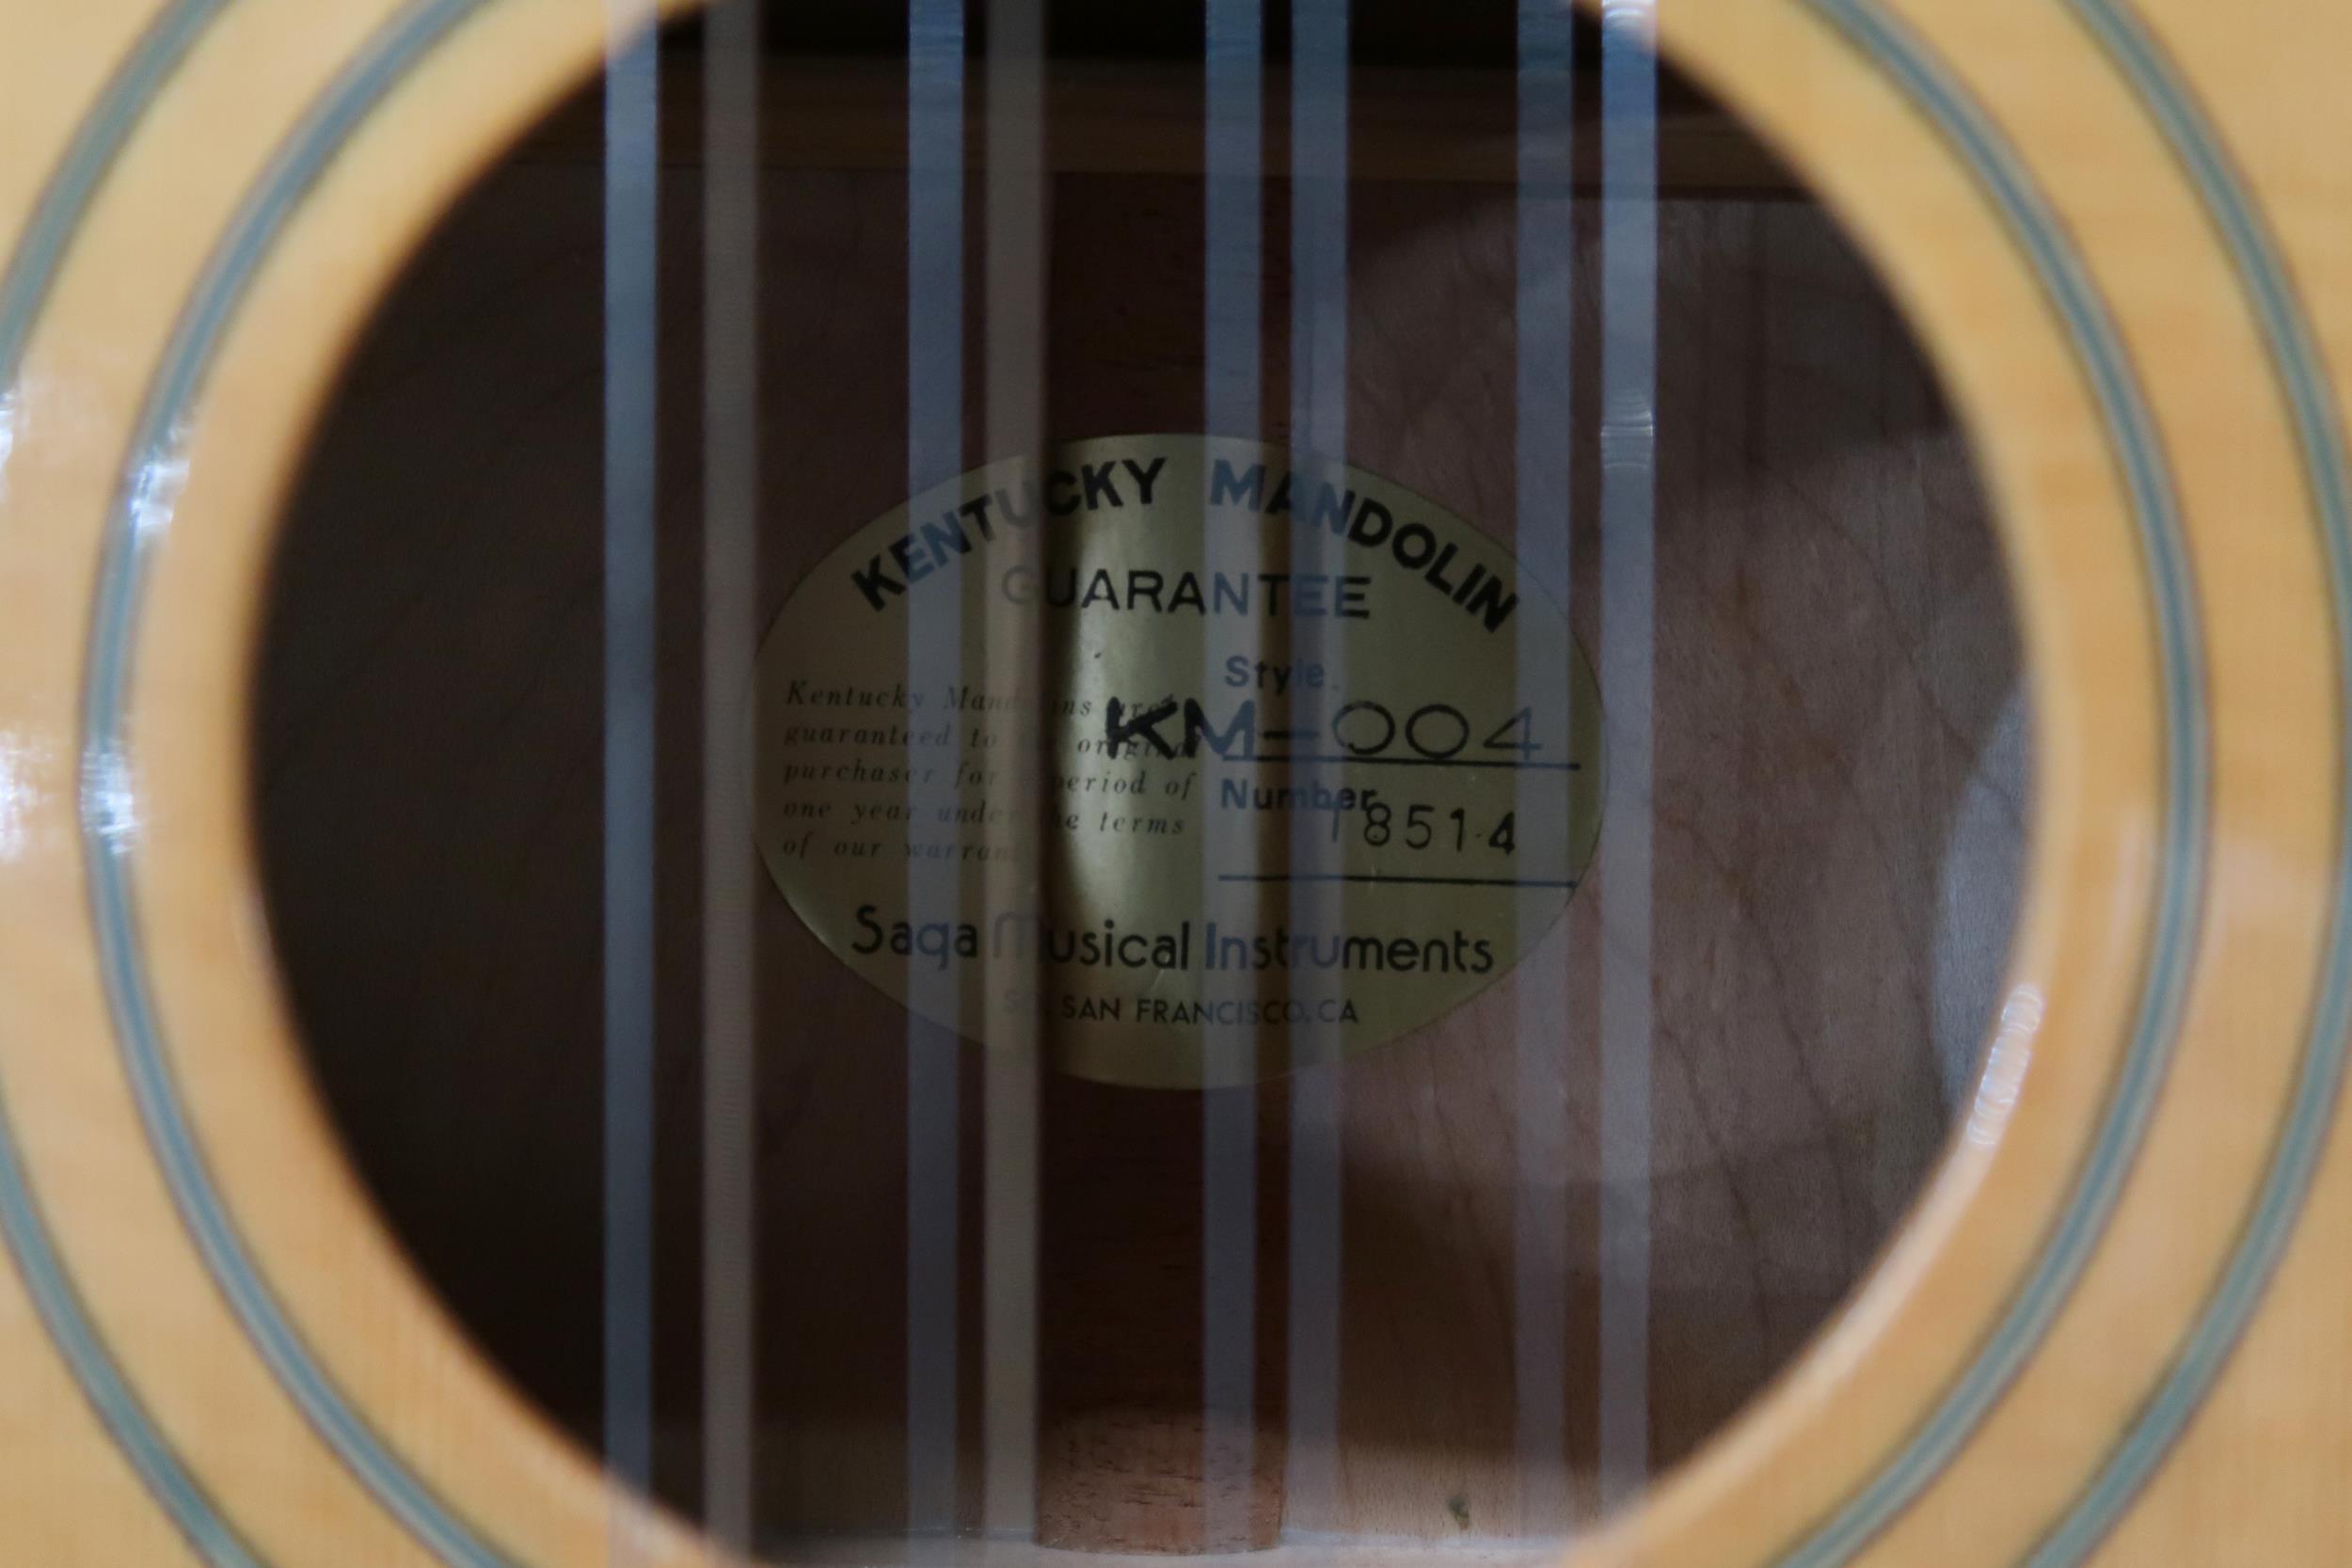 A Kentucky bouzouki mandolin 24 frets model KM-004 serial number 18514 bearing label to the interior - Image 6 of 16